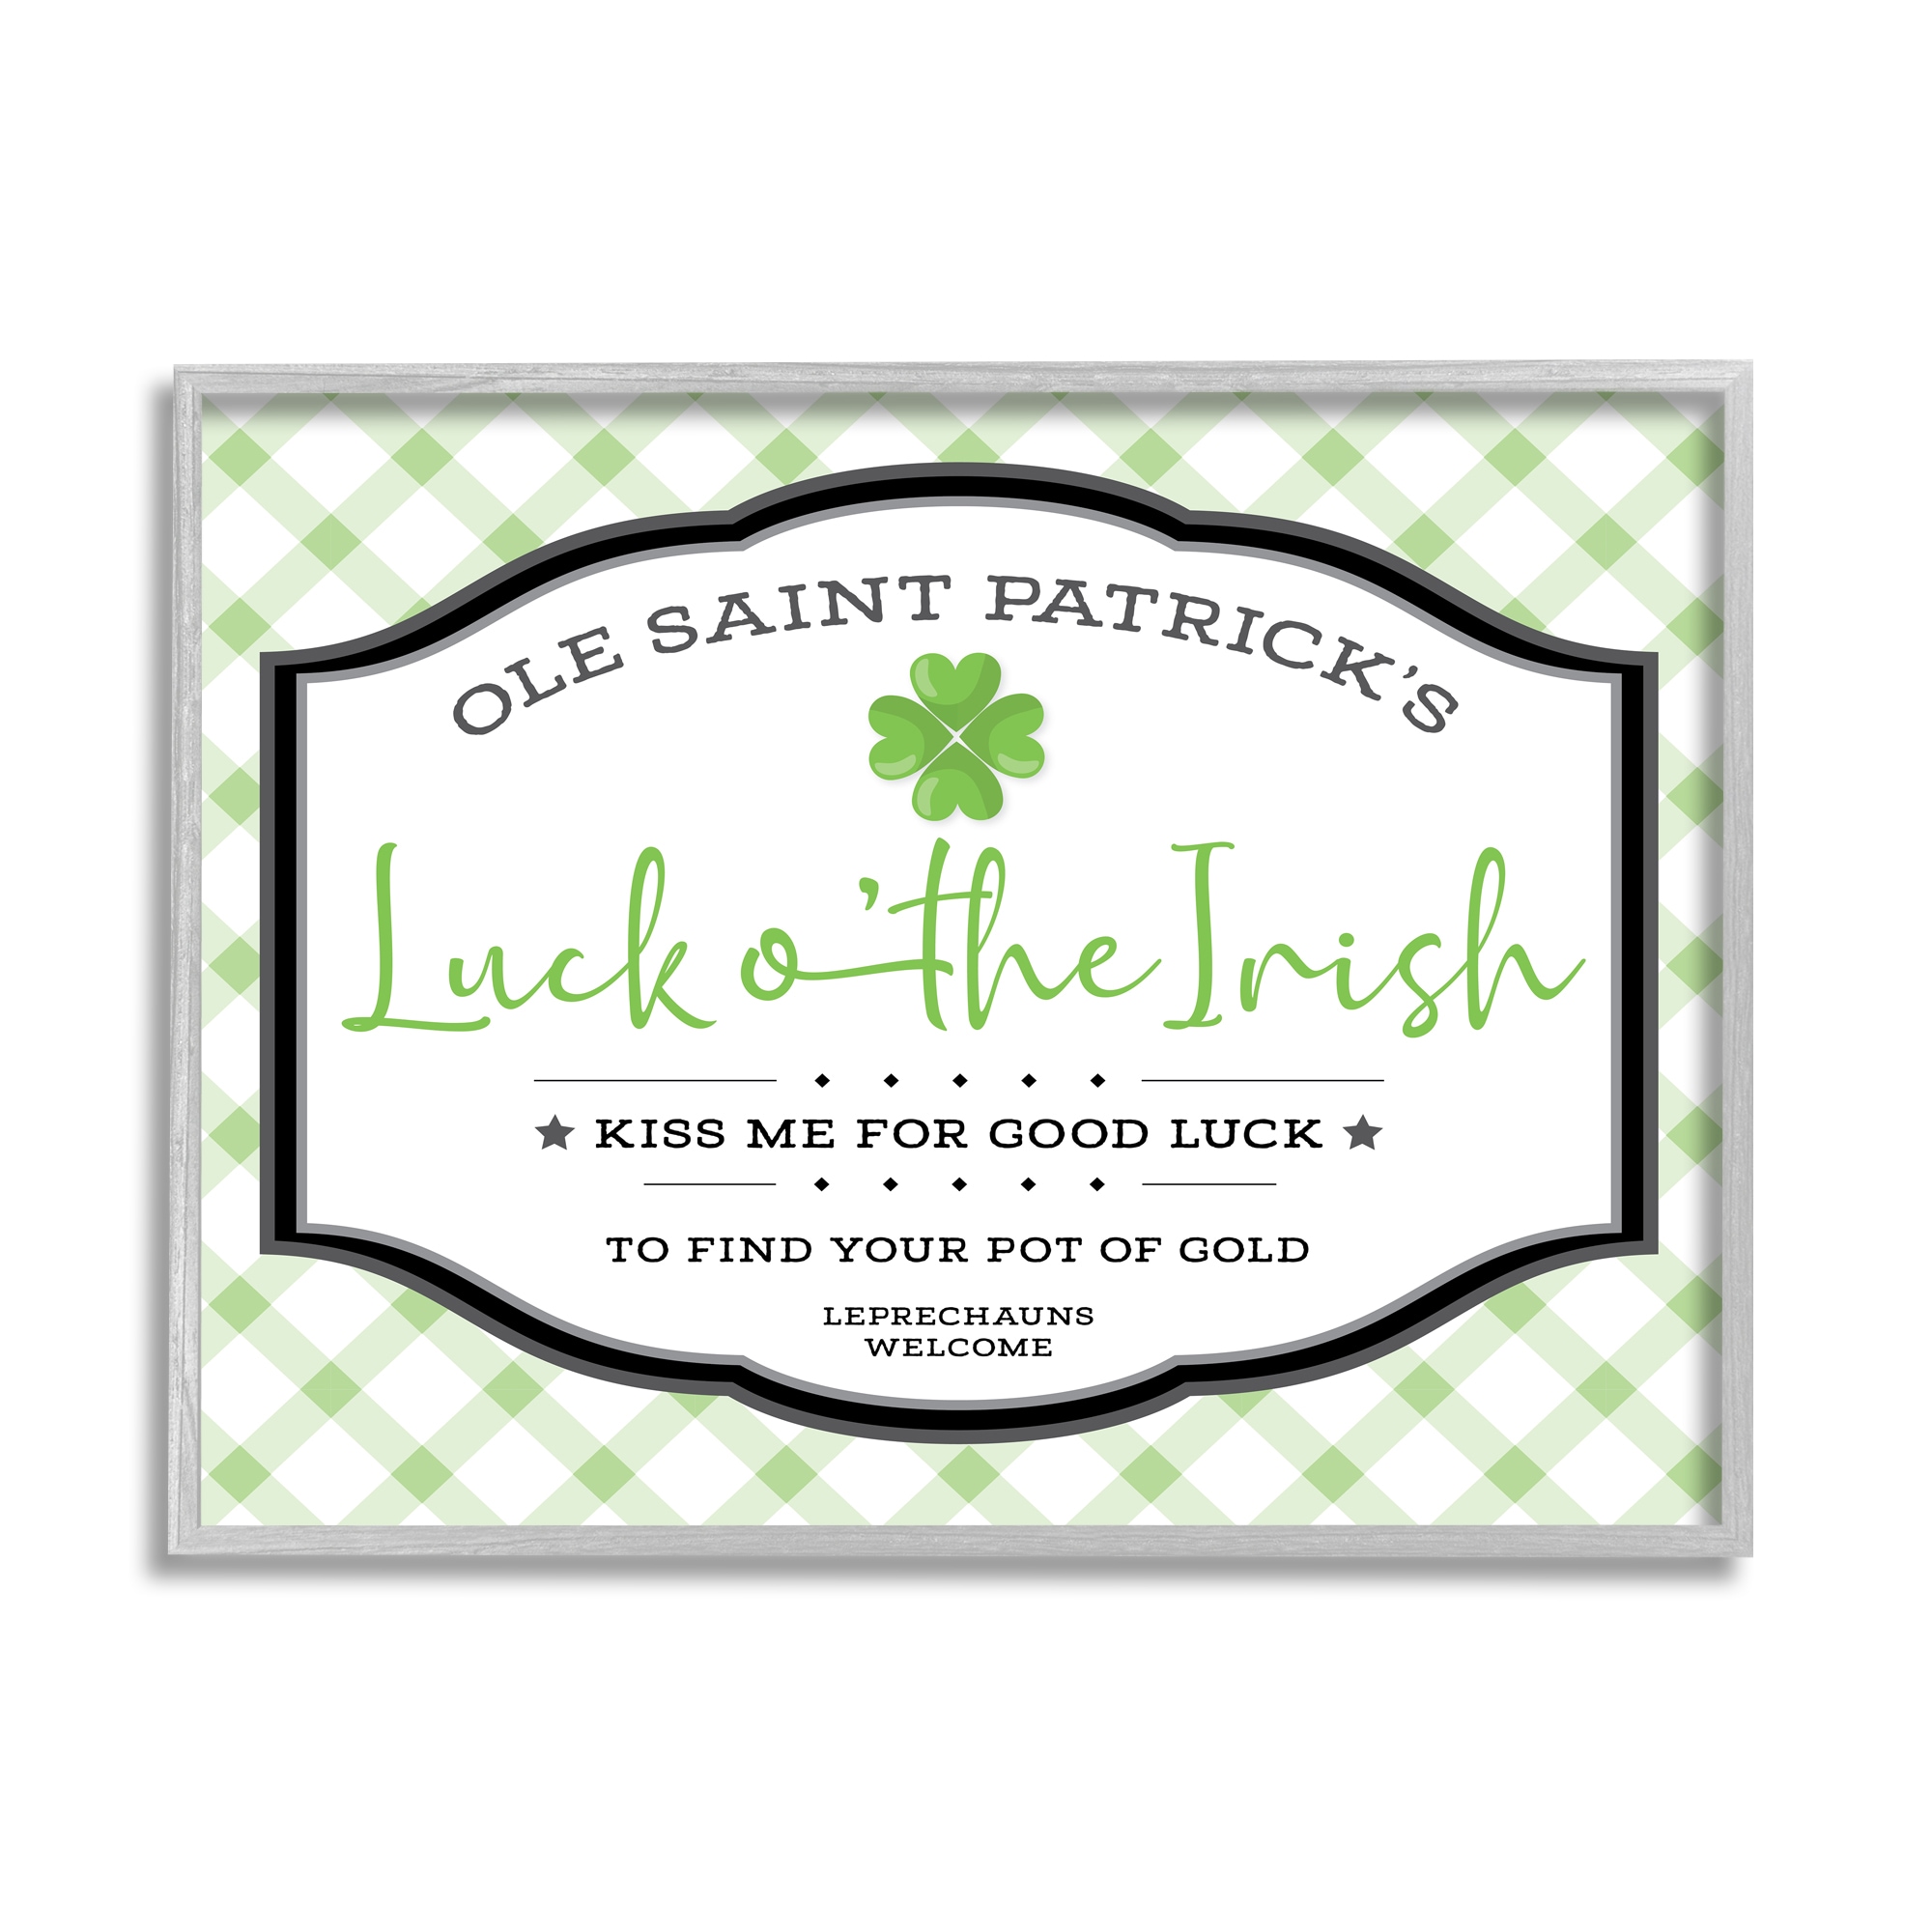 Stupell Industries Saint Patrick's Luck o'the Irish Sign Green Plaid, 24 x 30, Designed by Ae Design